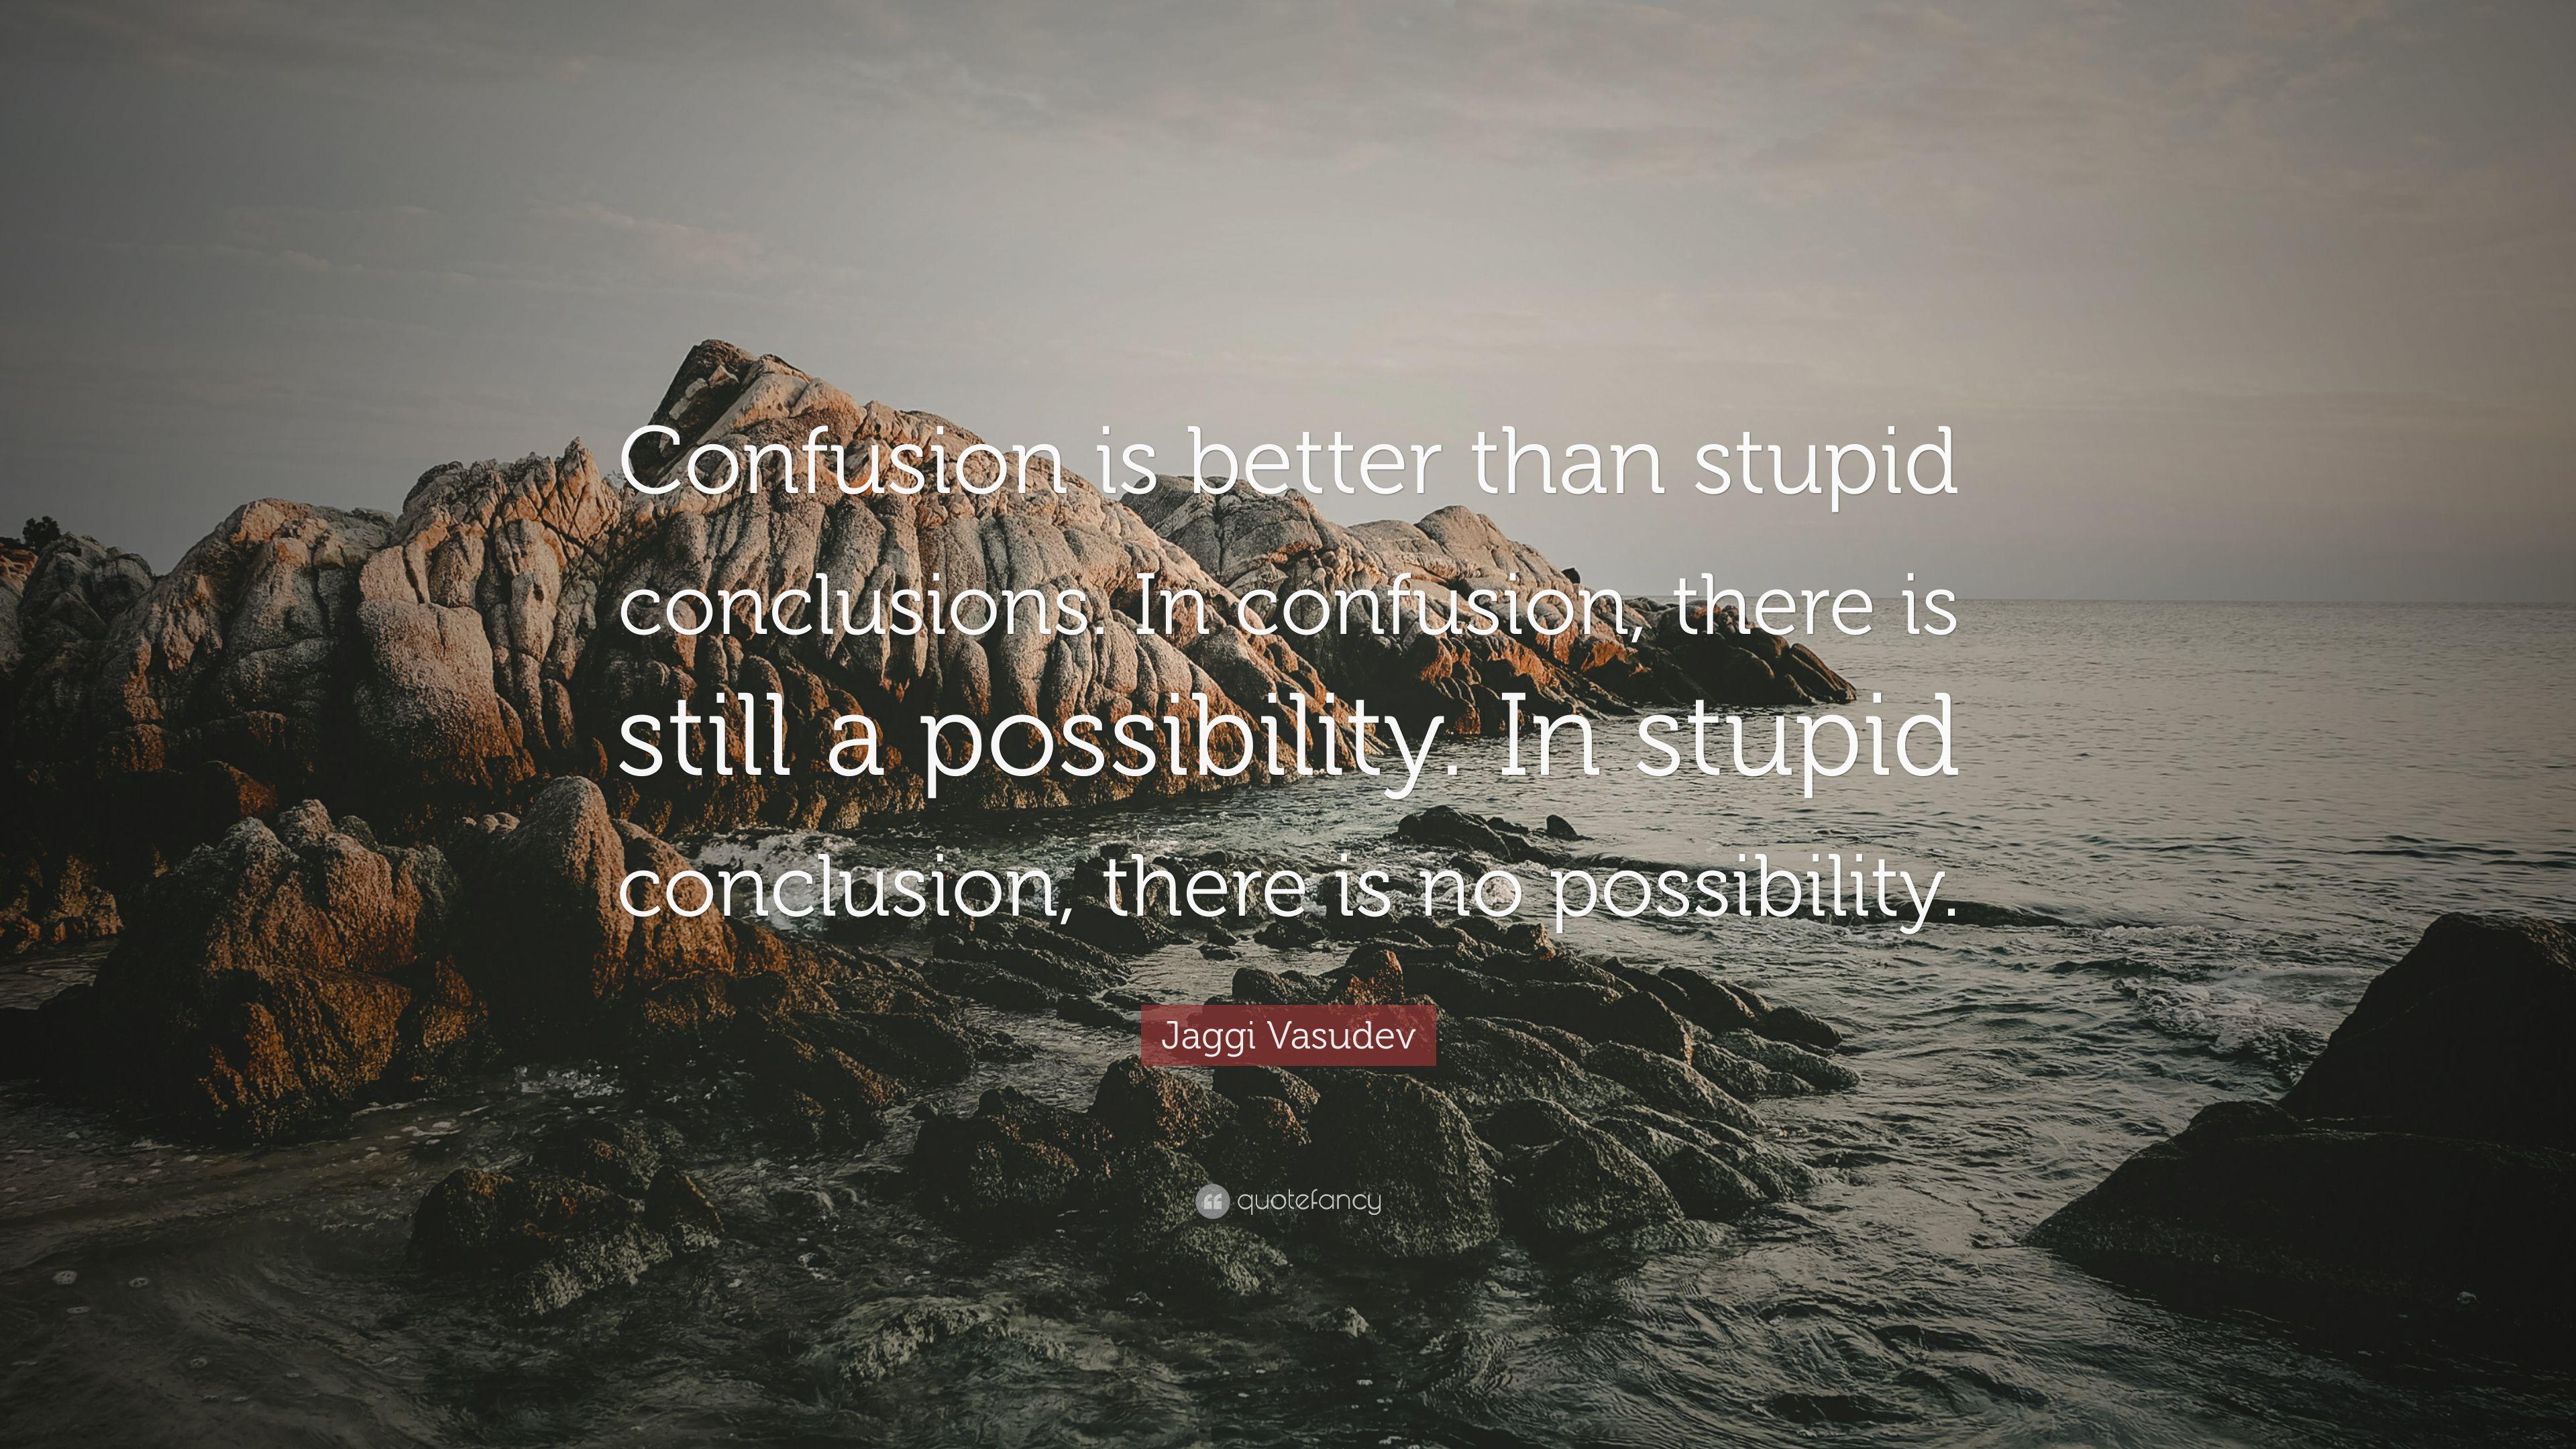 Jaggi Vasudev Quote: “Confusion is better than stupid conclusions